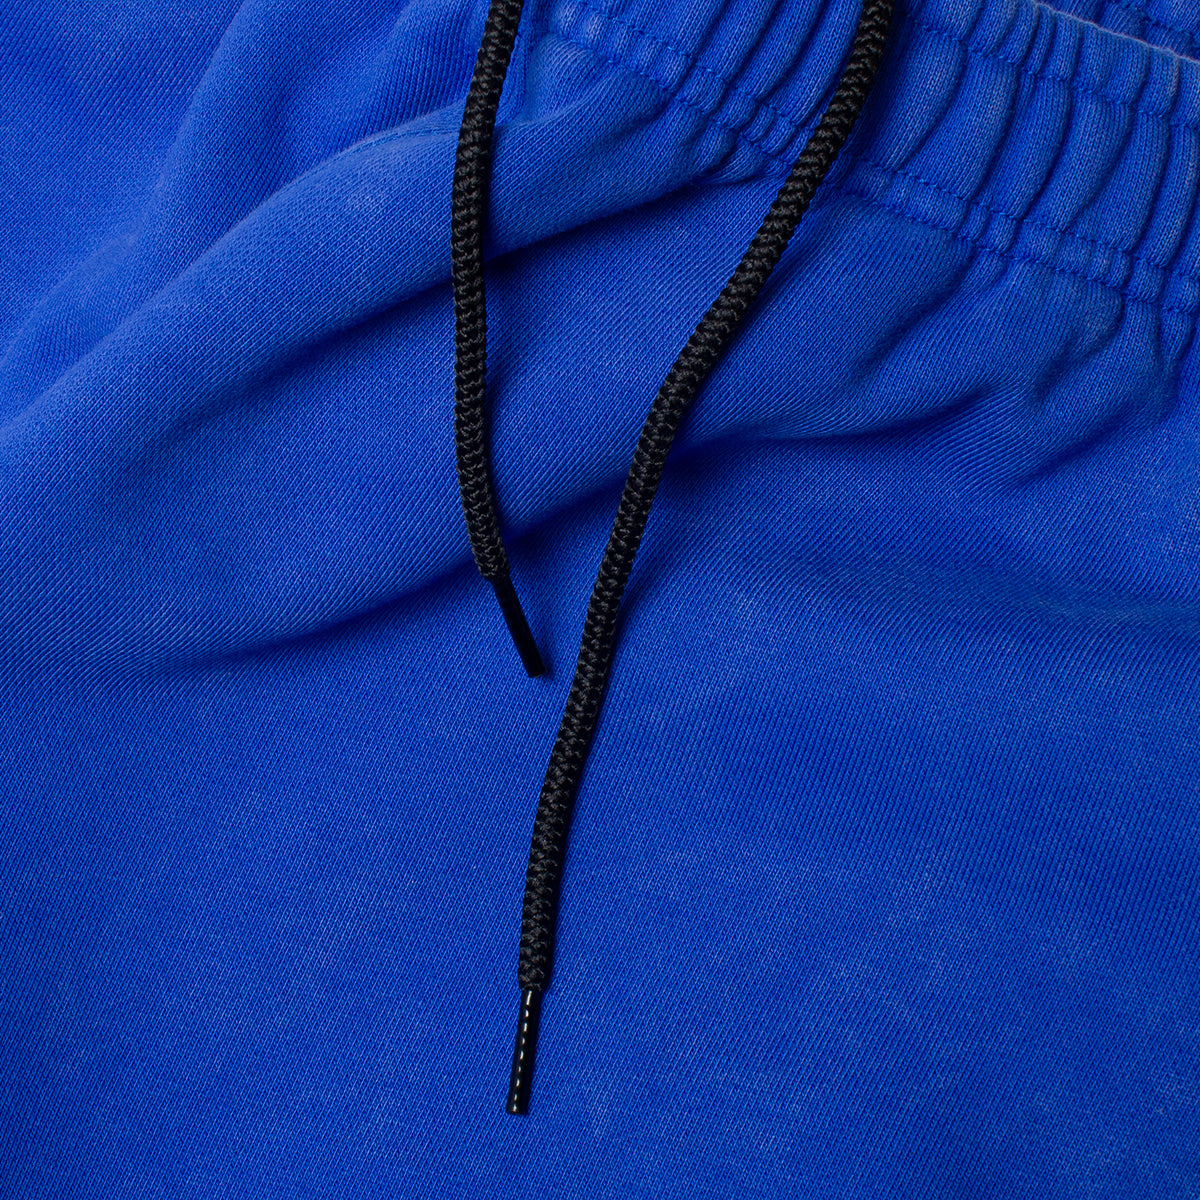 Nike x Stussy Washed Fleece Pant Style # DR4025-480 Color : Game Royal